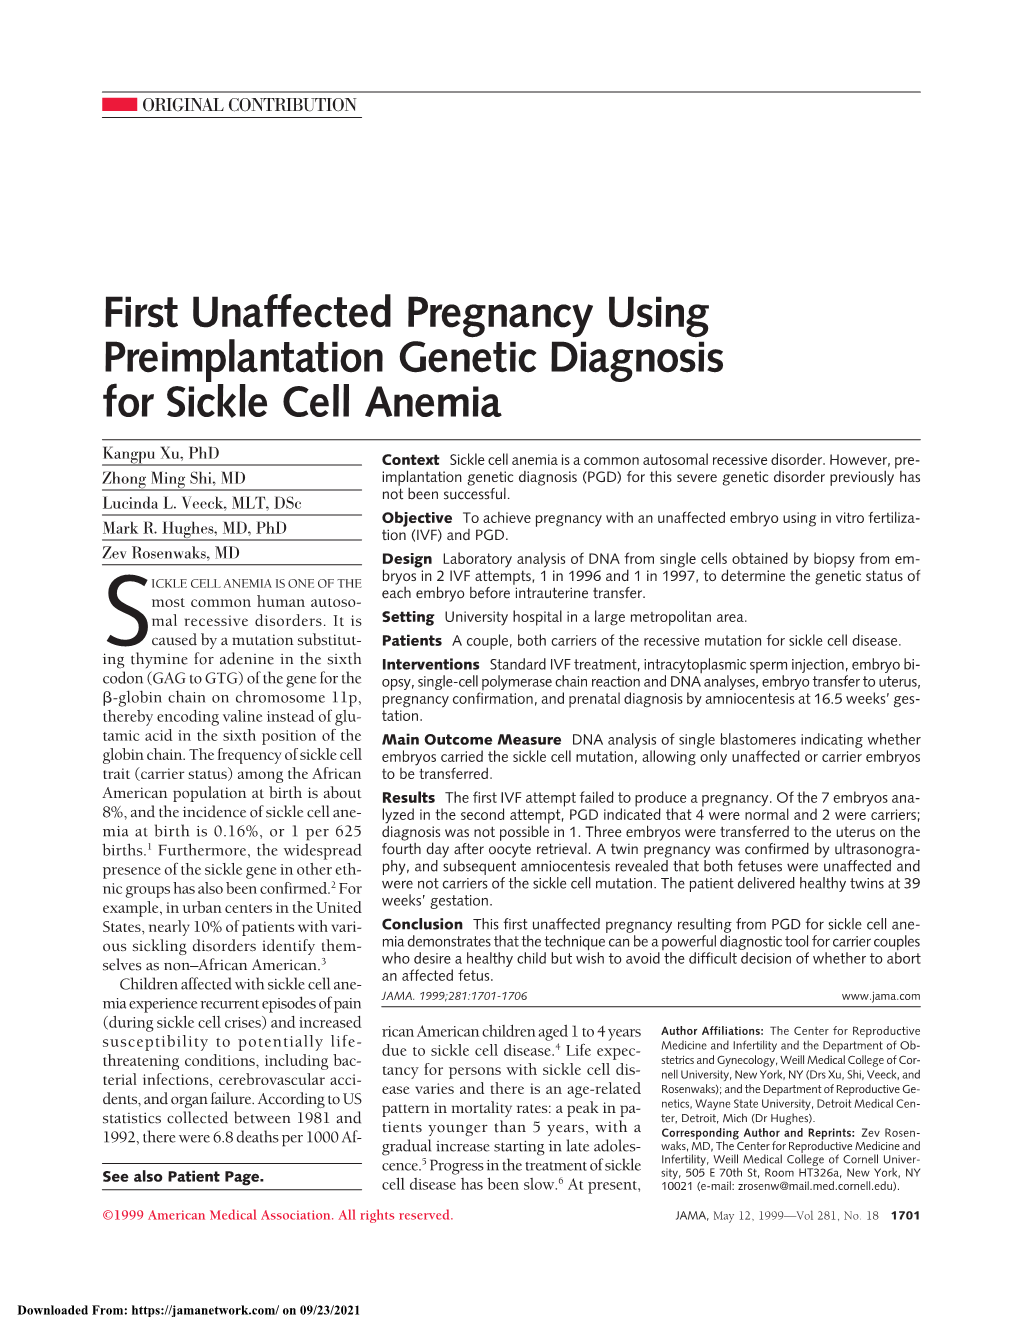 First Unaffected Pregnancy Using Preimplantation Genetic Diagnosis for Sickle Cell Anemia